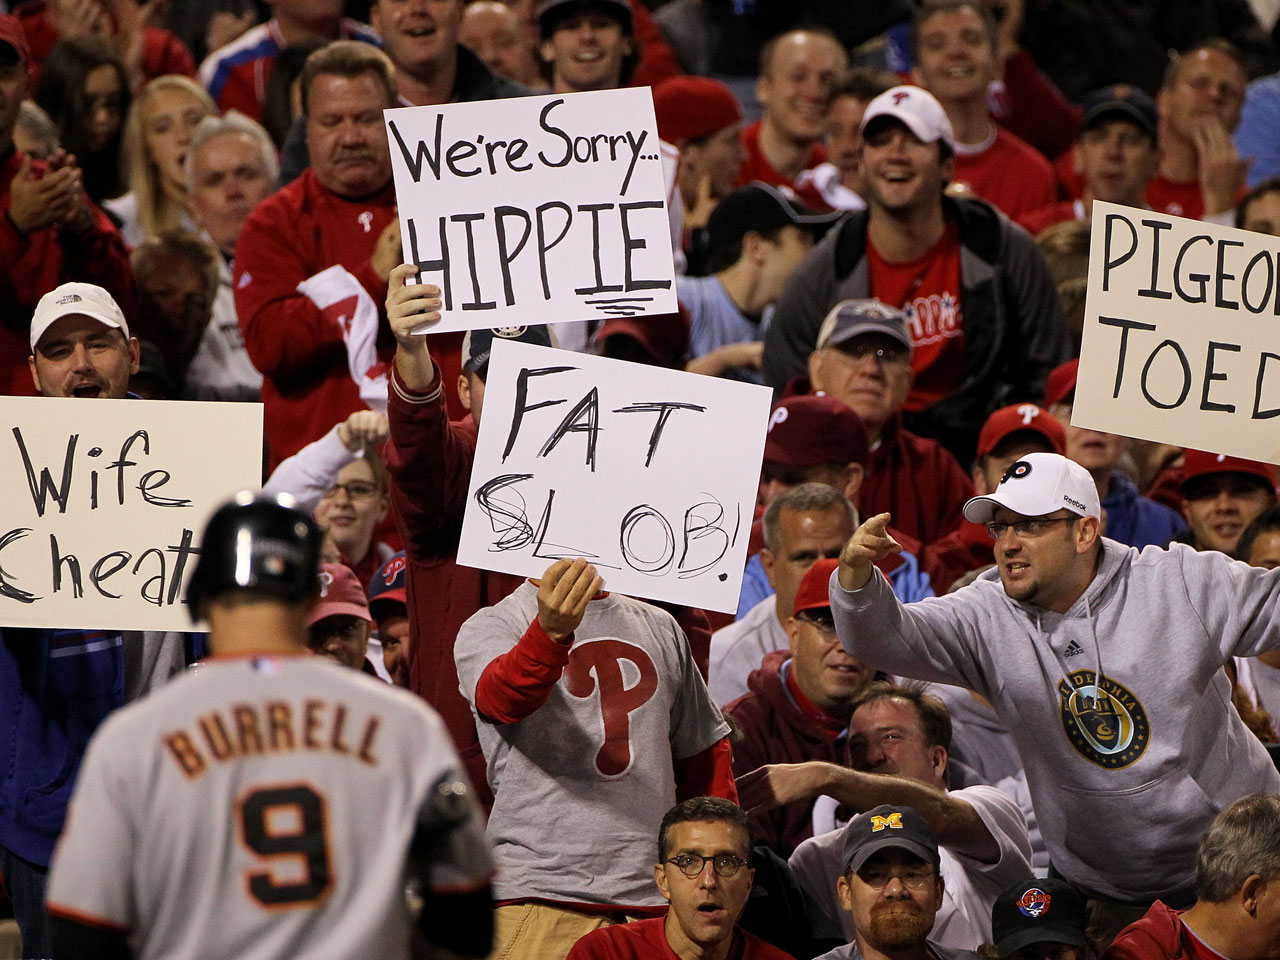 Phillies' fans most loyal, Facebook study says - CBS News